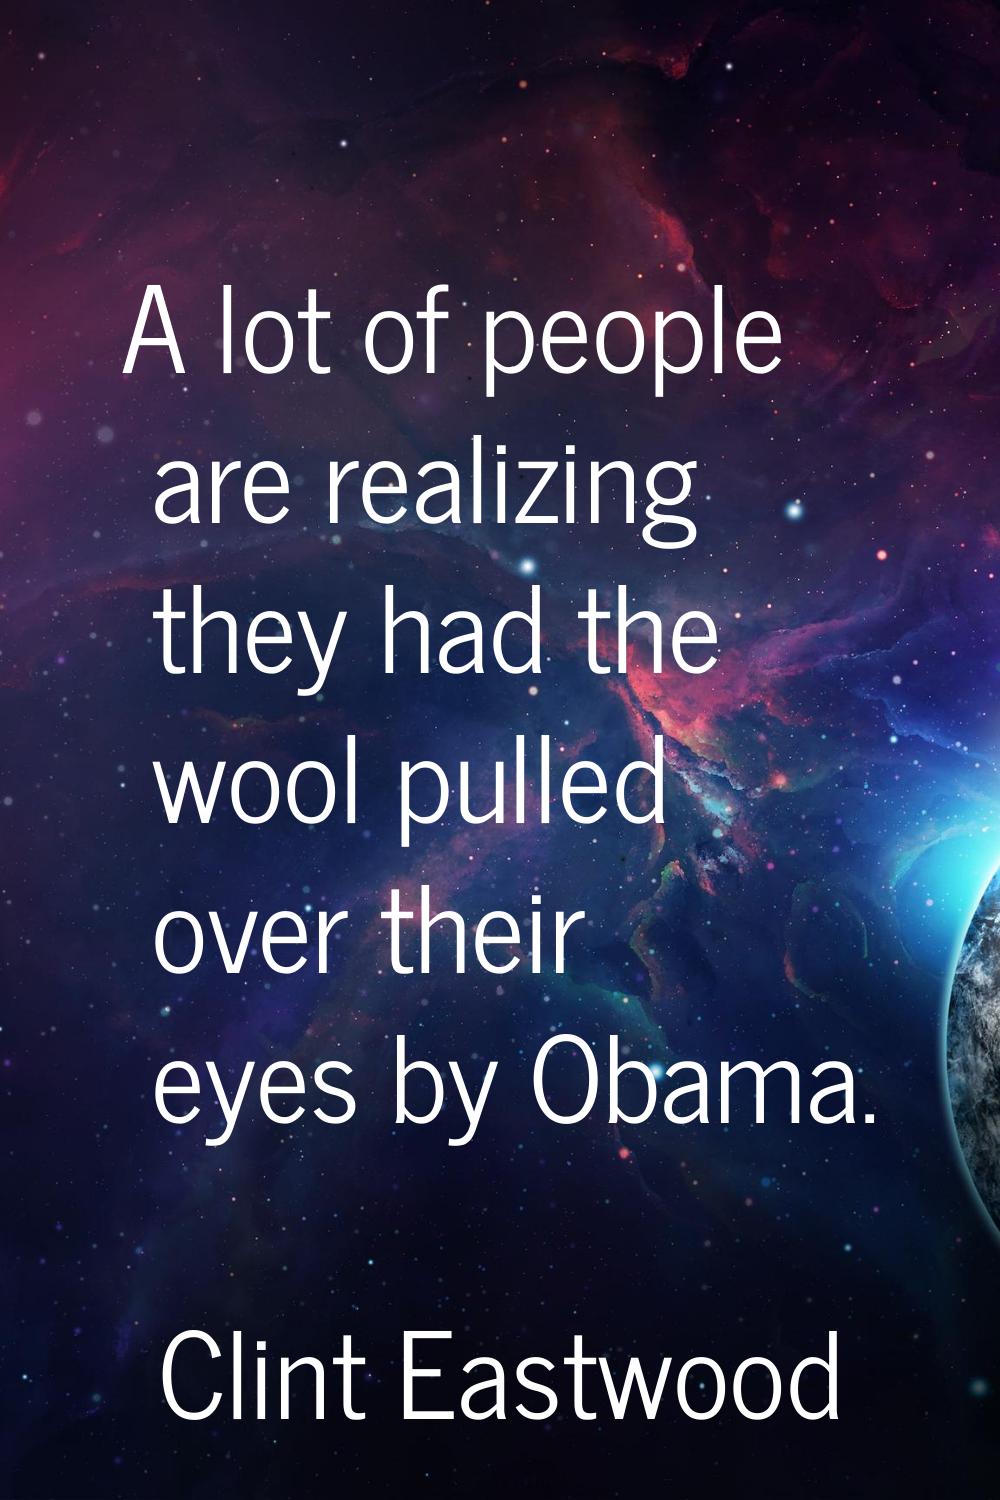 A lot of people are realizing they had the wool pulled over their eyes by Obama.